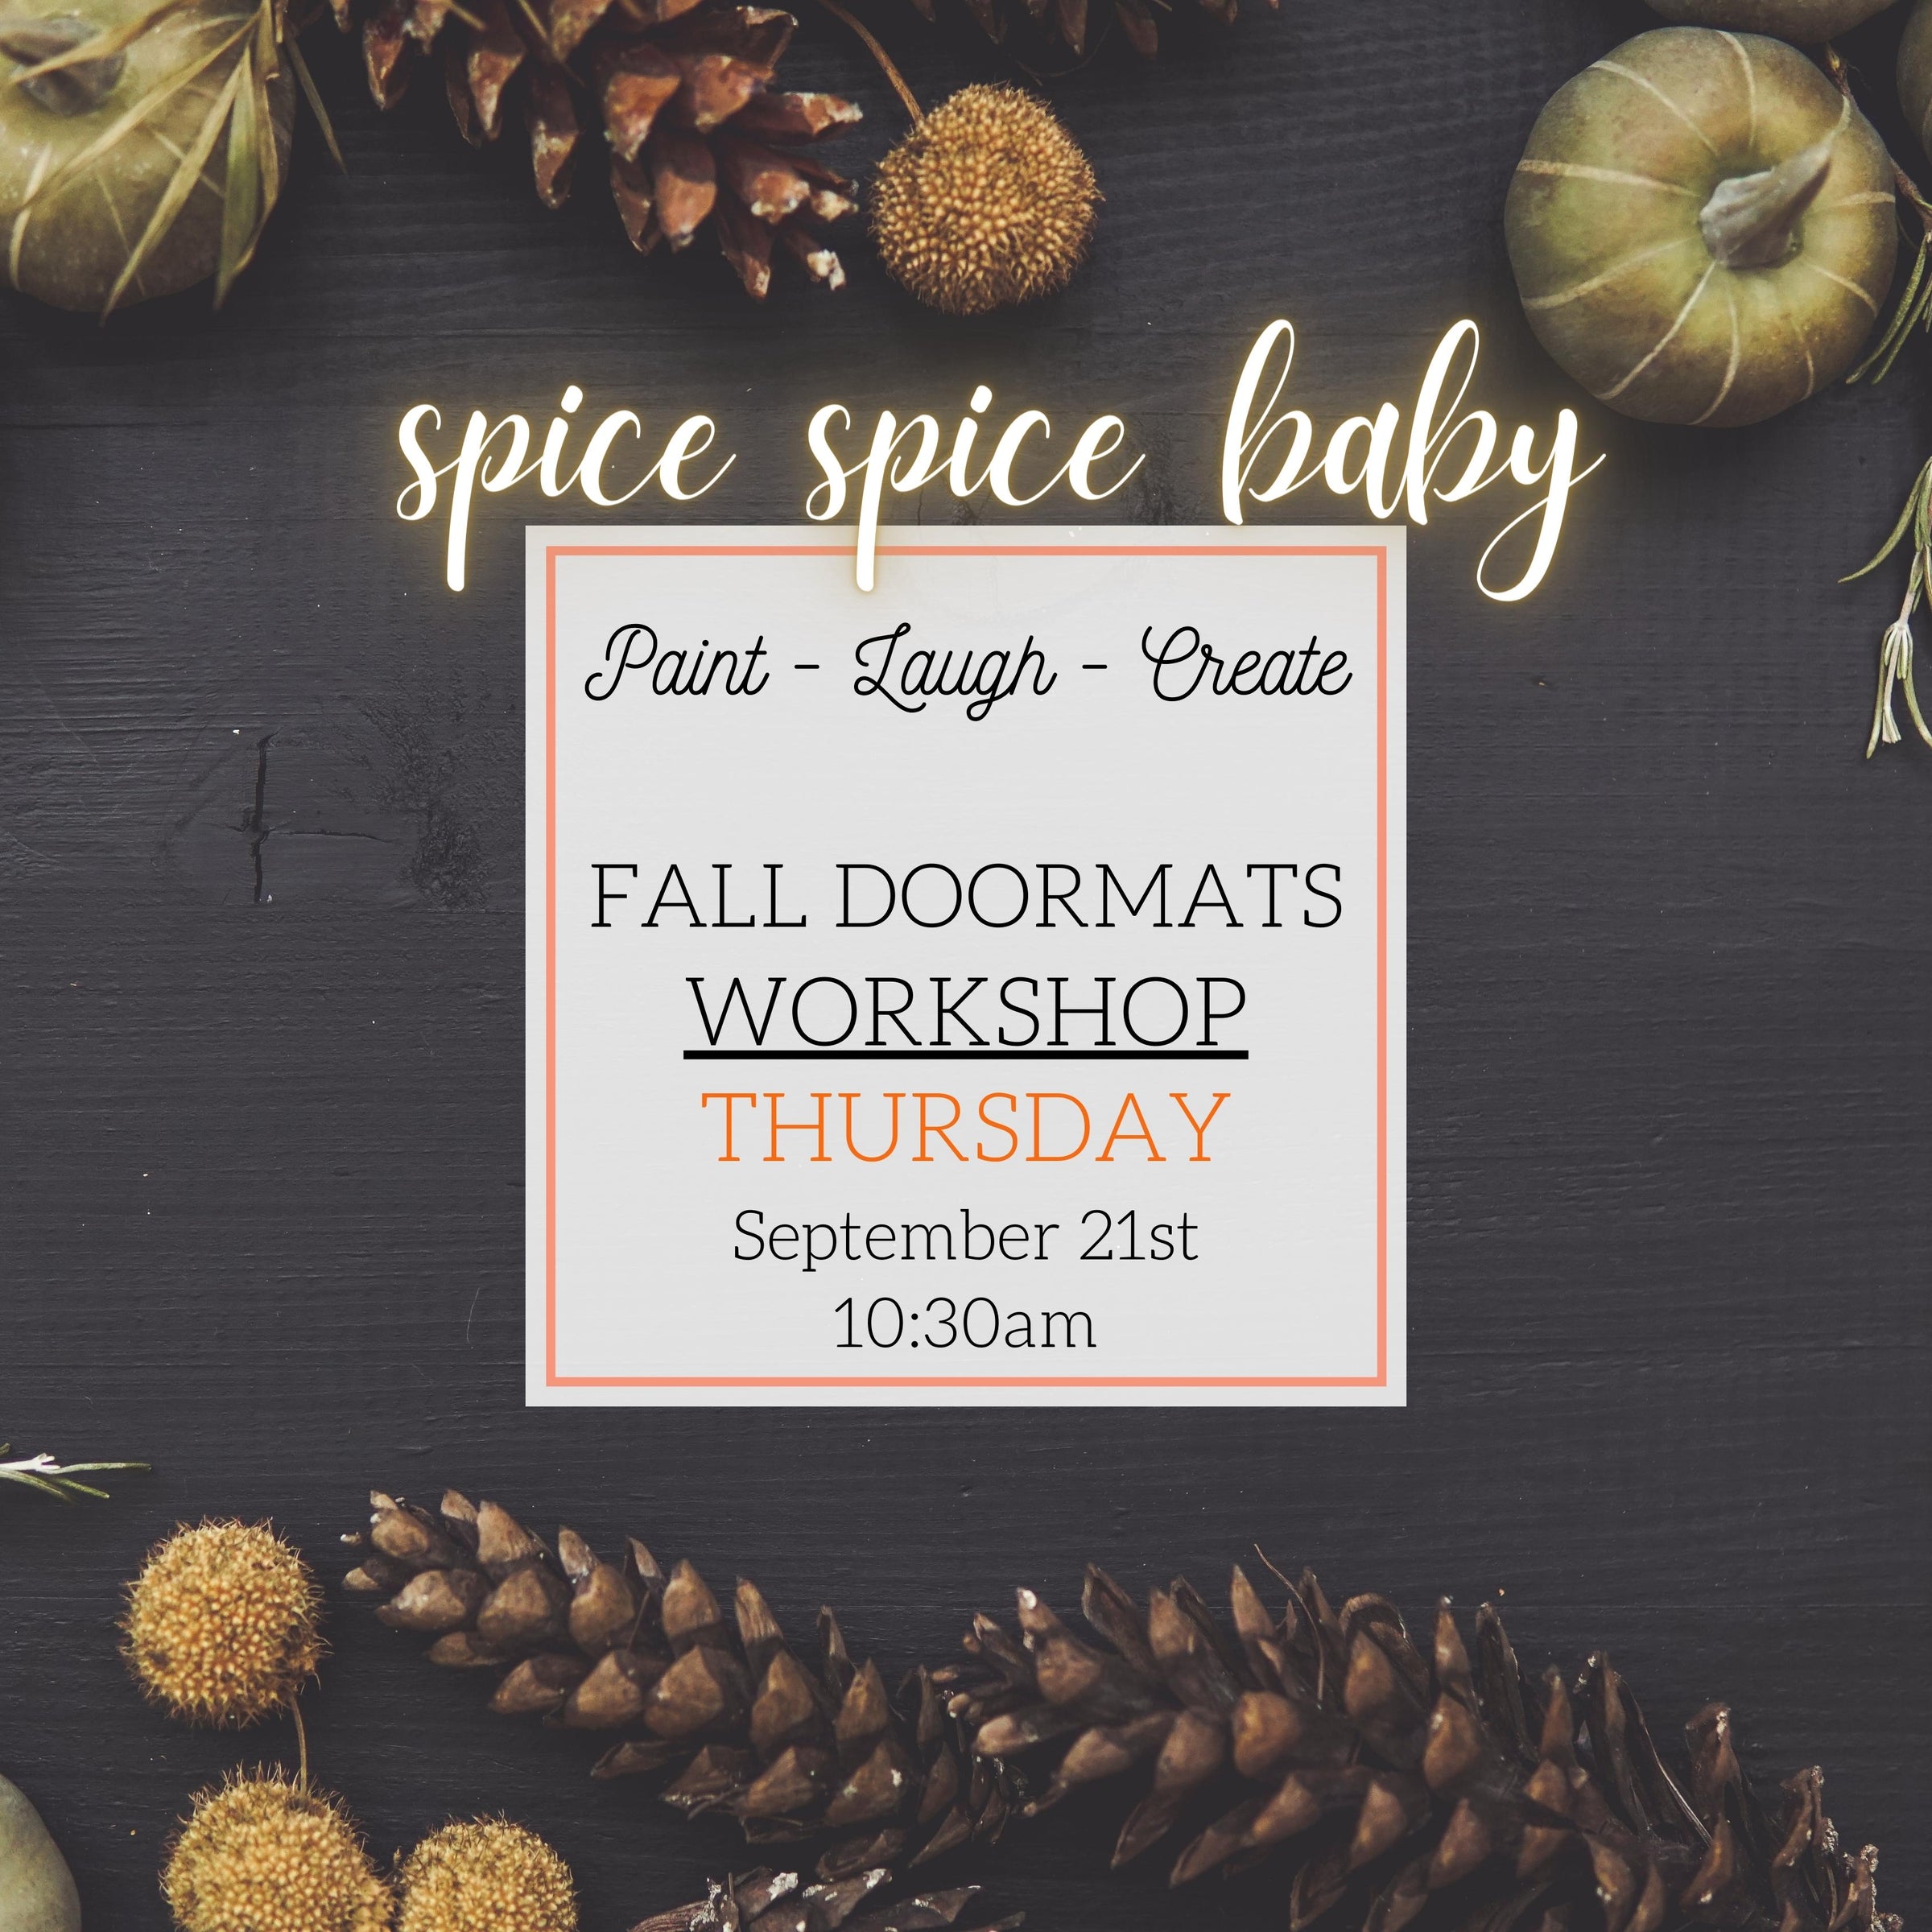 SPICE SPICE BABY - FALL DOORMATS WORKSHOP - SEPT 21ST, 10:30AM